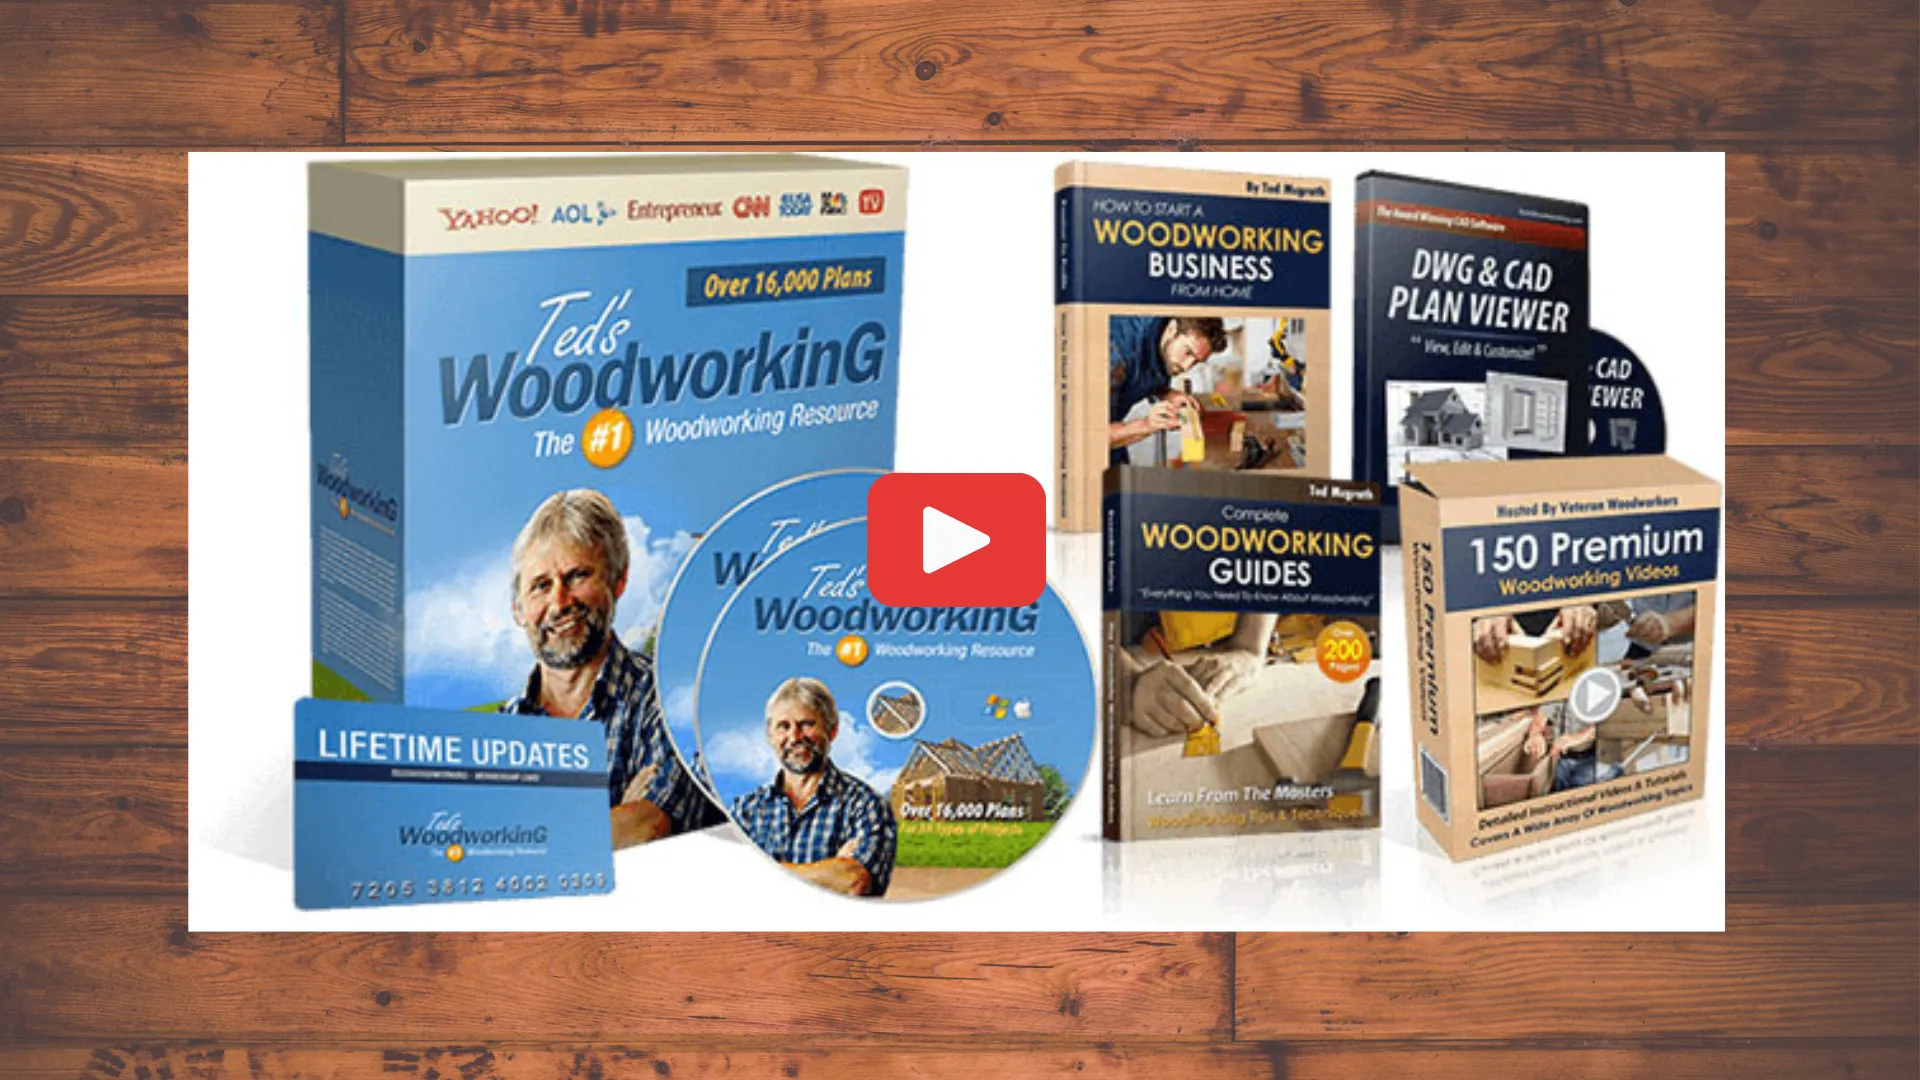 World's Largest Database for Woodworking Projects